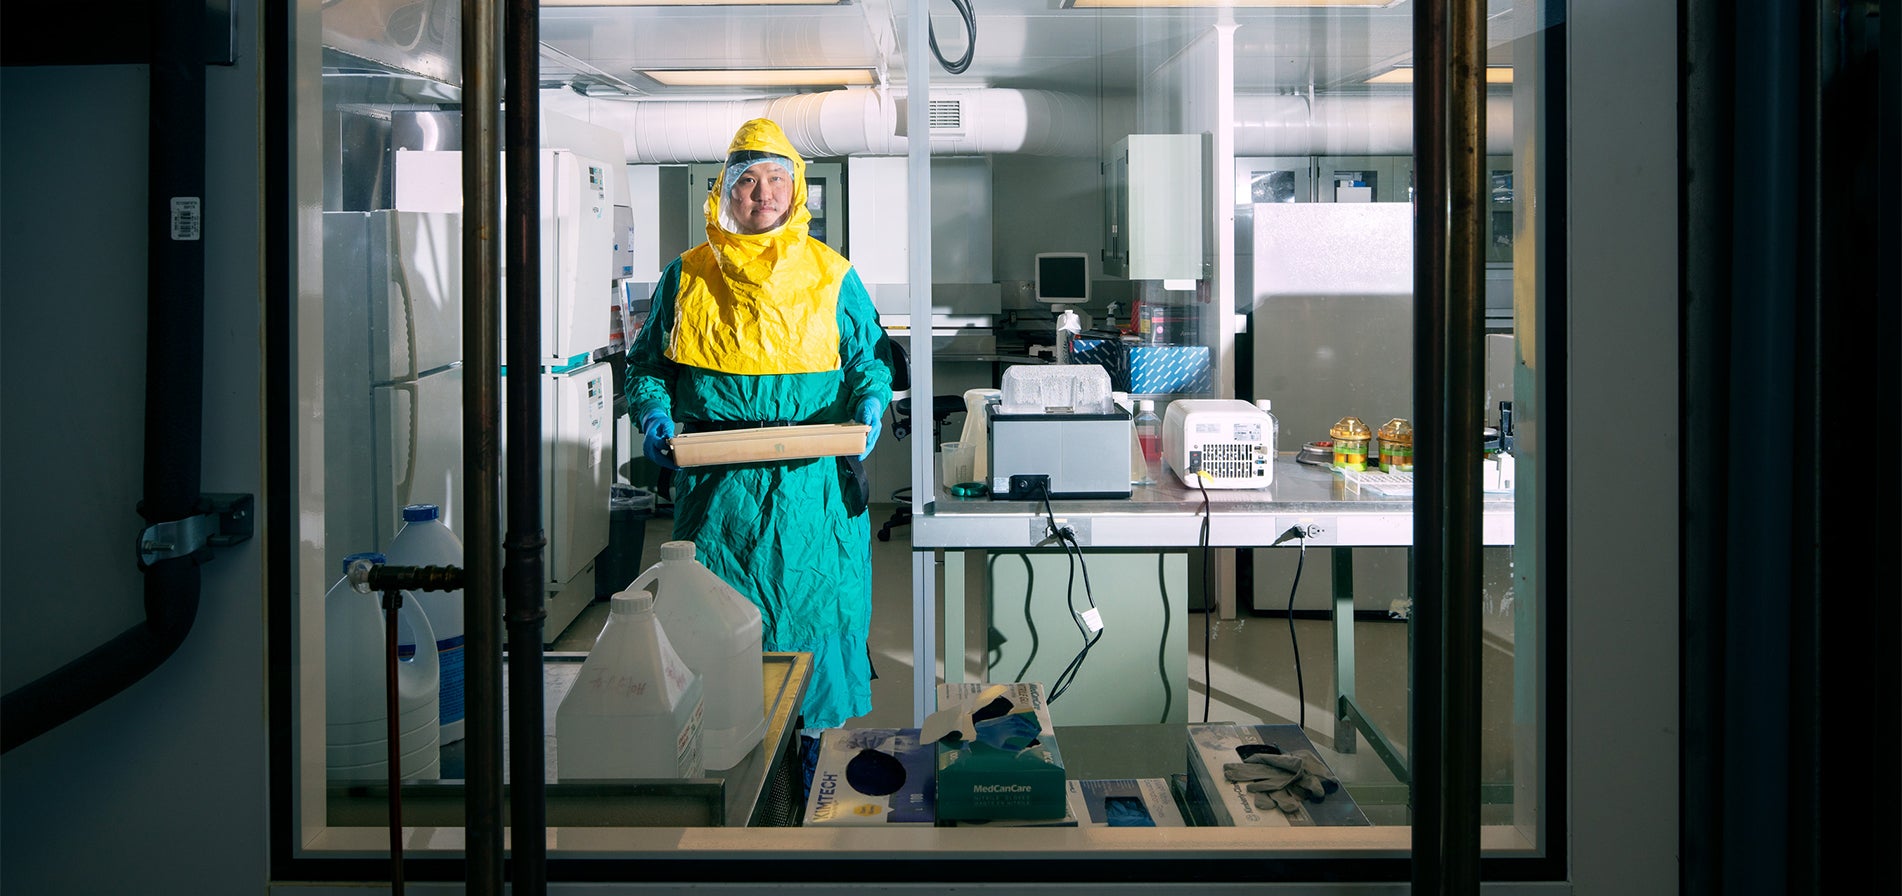 Steven Ahn looks out from working in the Toronto High Containment Facility. Photo by Nathan Cyprys.